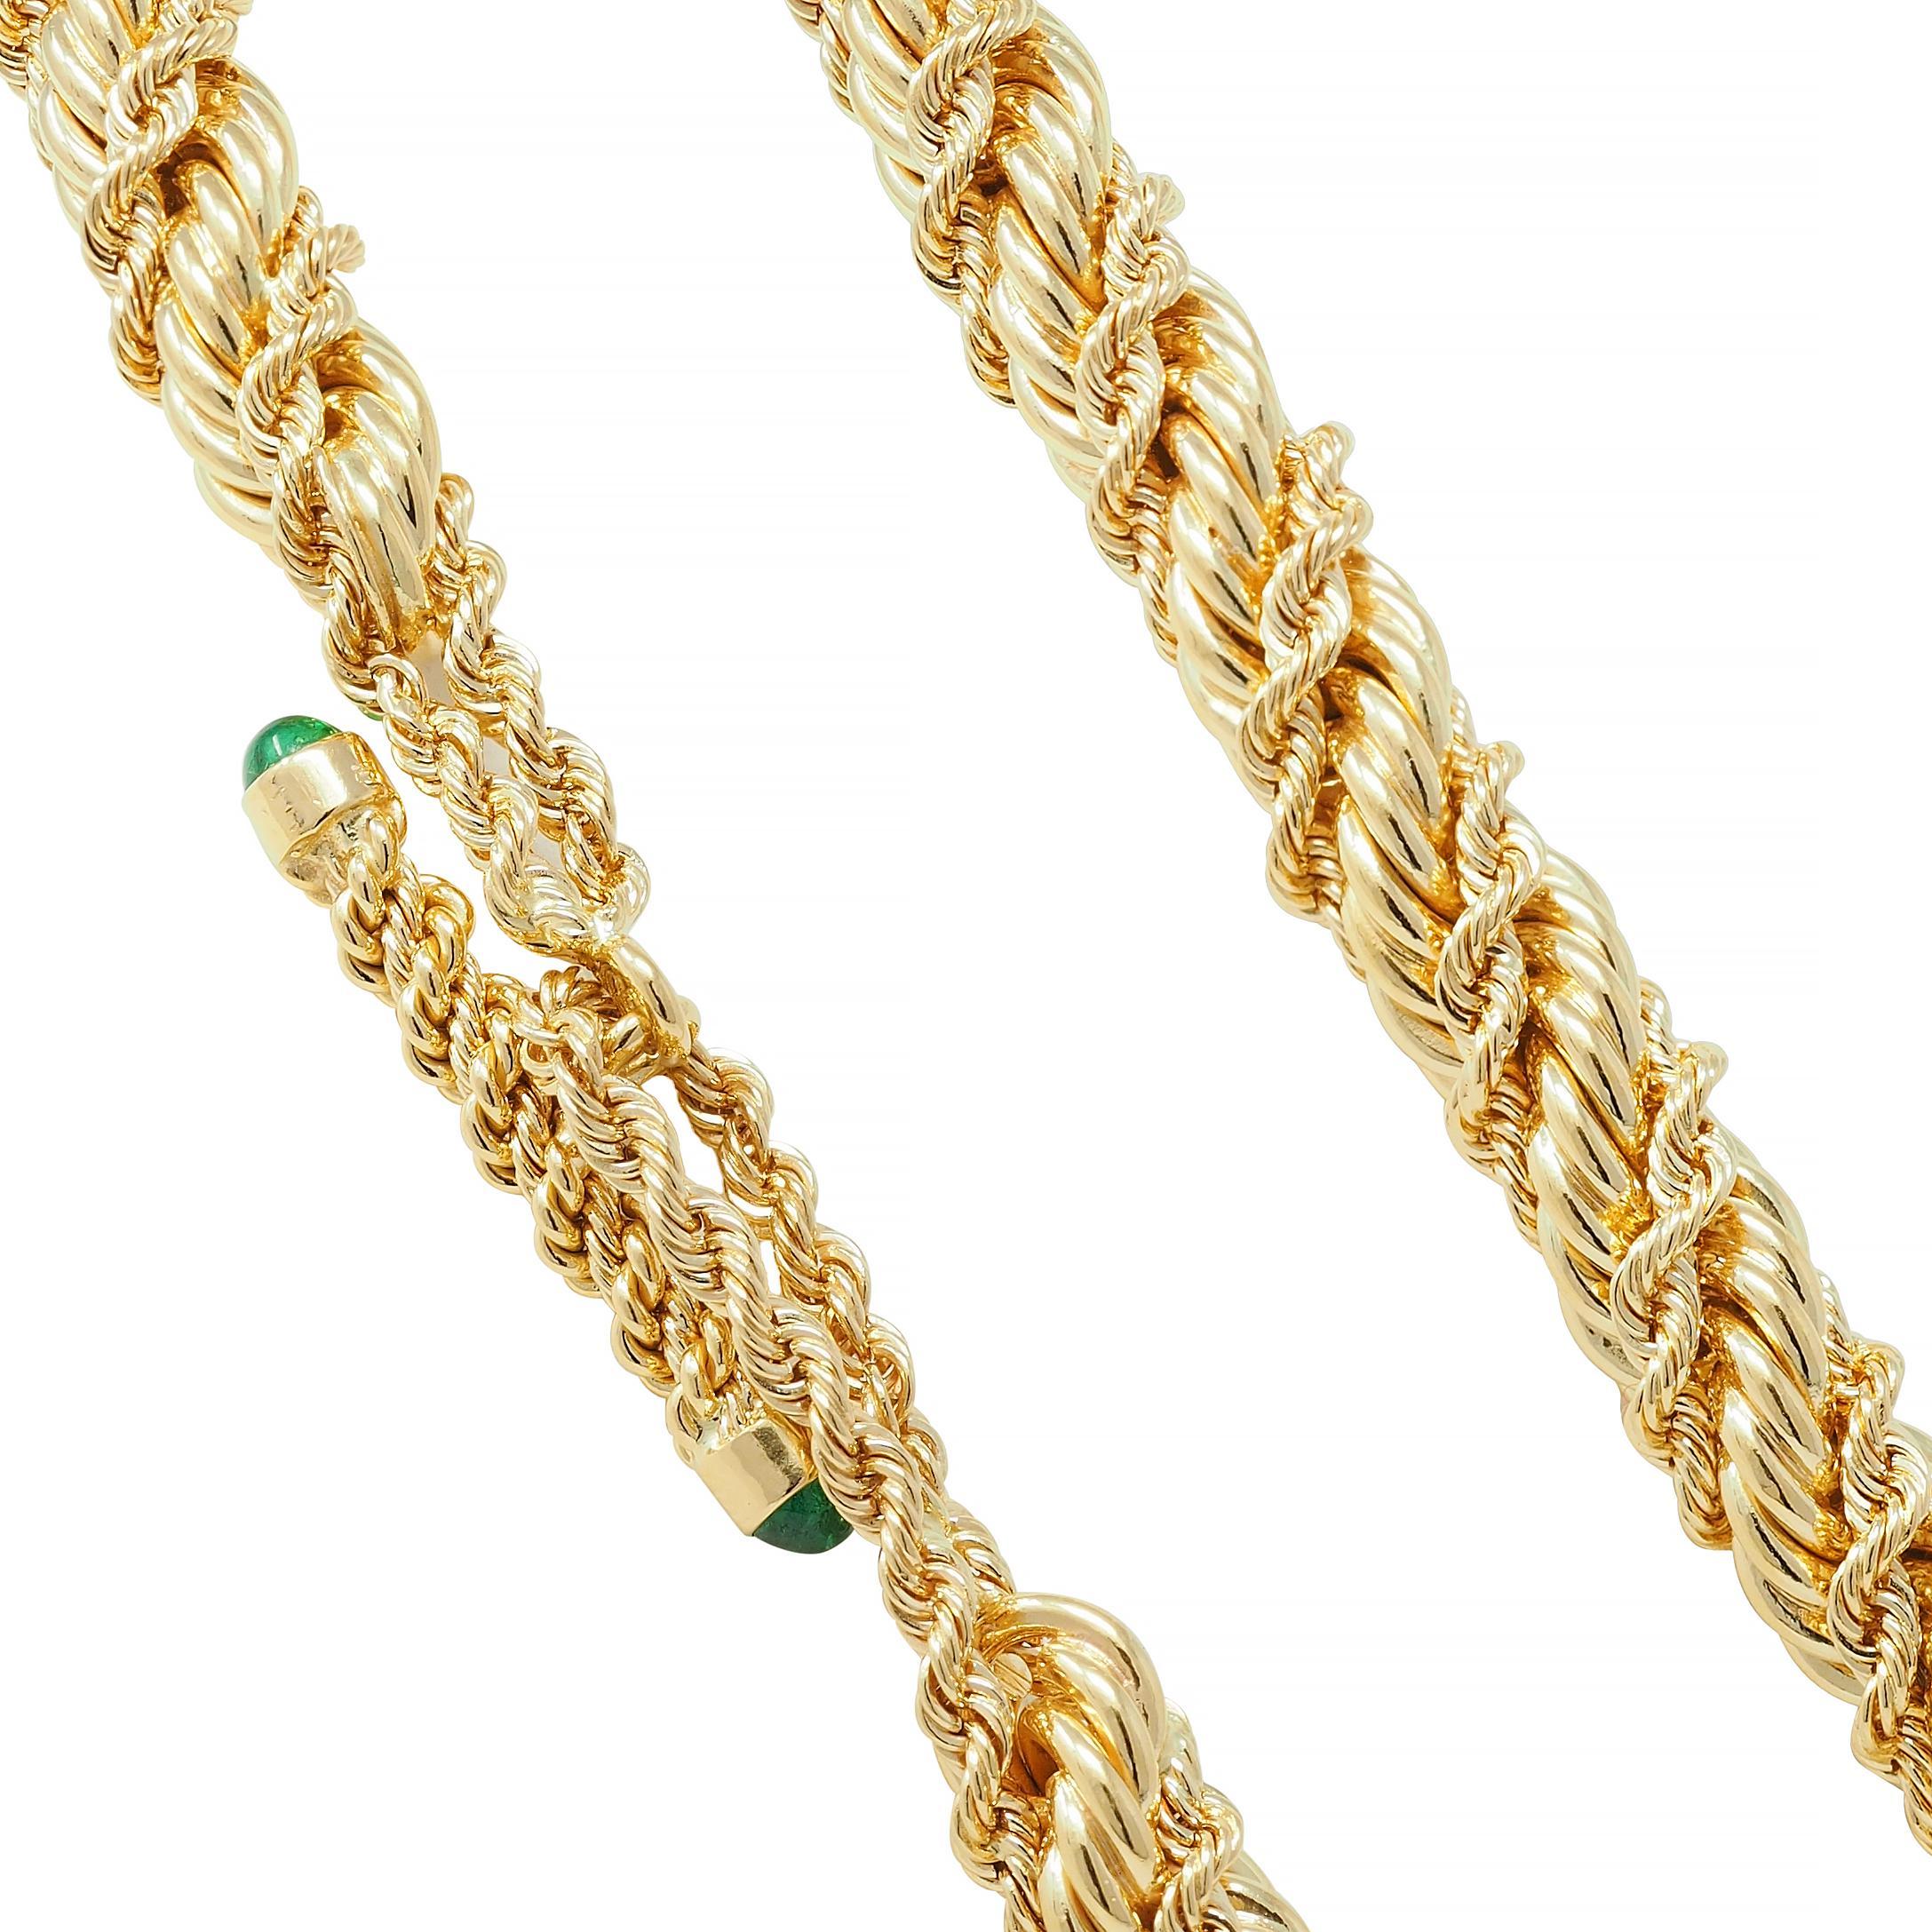 Schlumberger Tiffany & Co. Emerald 18 Karat Gold Twisted Rope Vintage Necklace For Sale 1